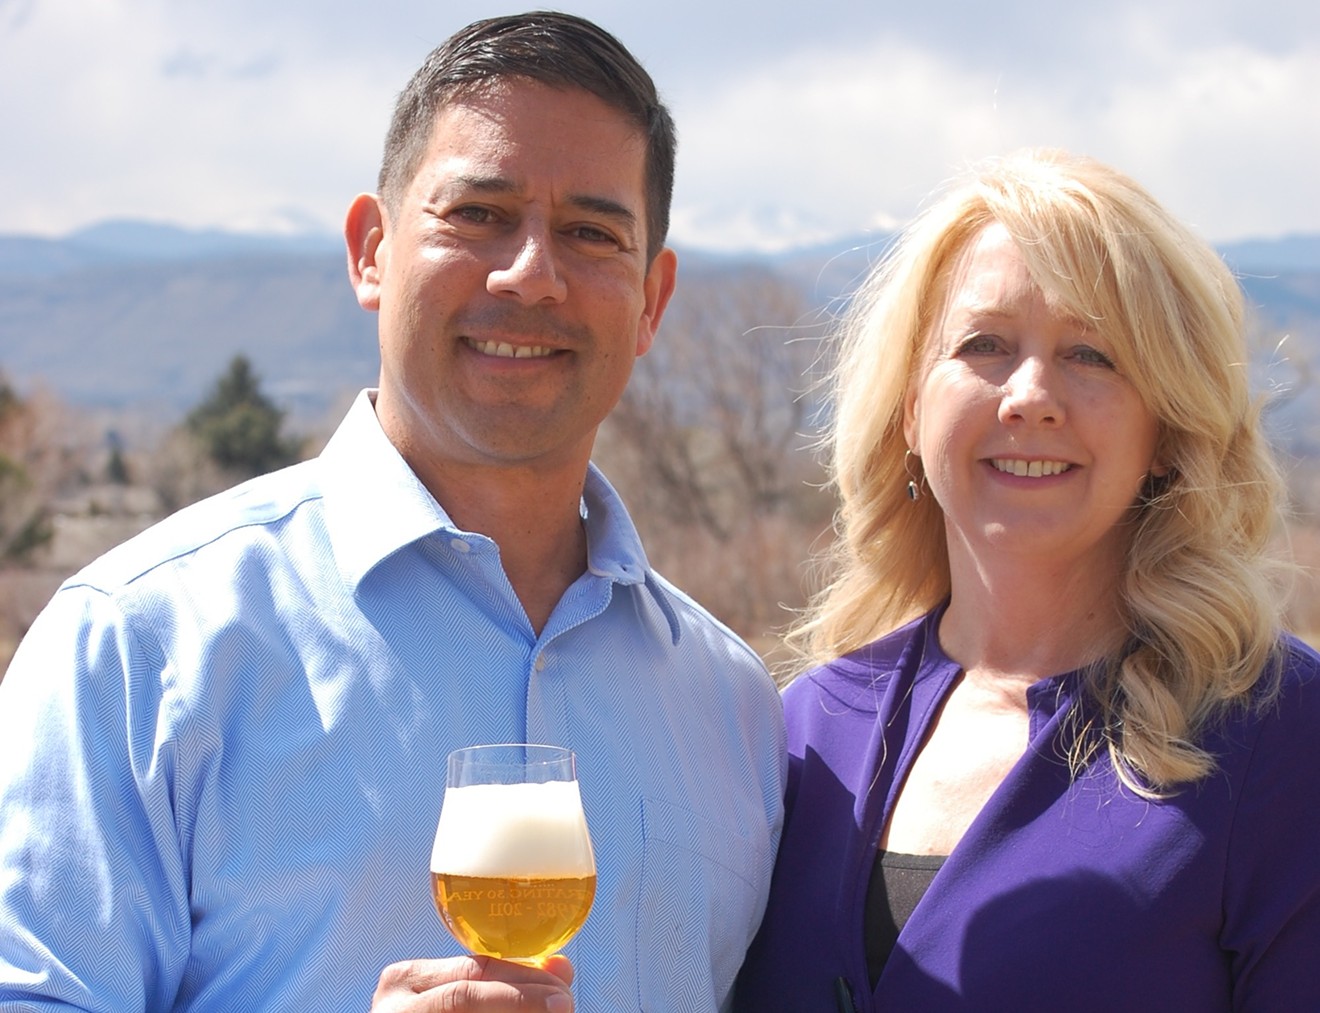 Keith and Jodi Villa announced their launch of a new pot-infused beer company on Wednesday, March 28.